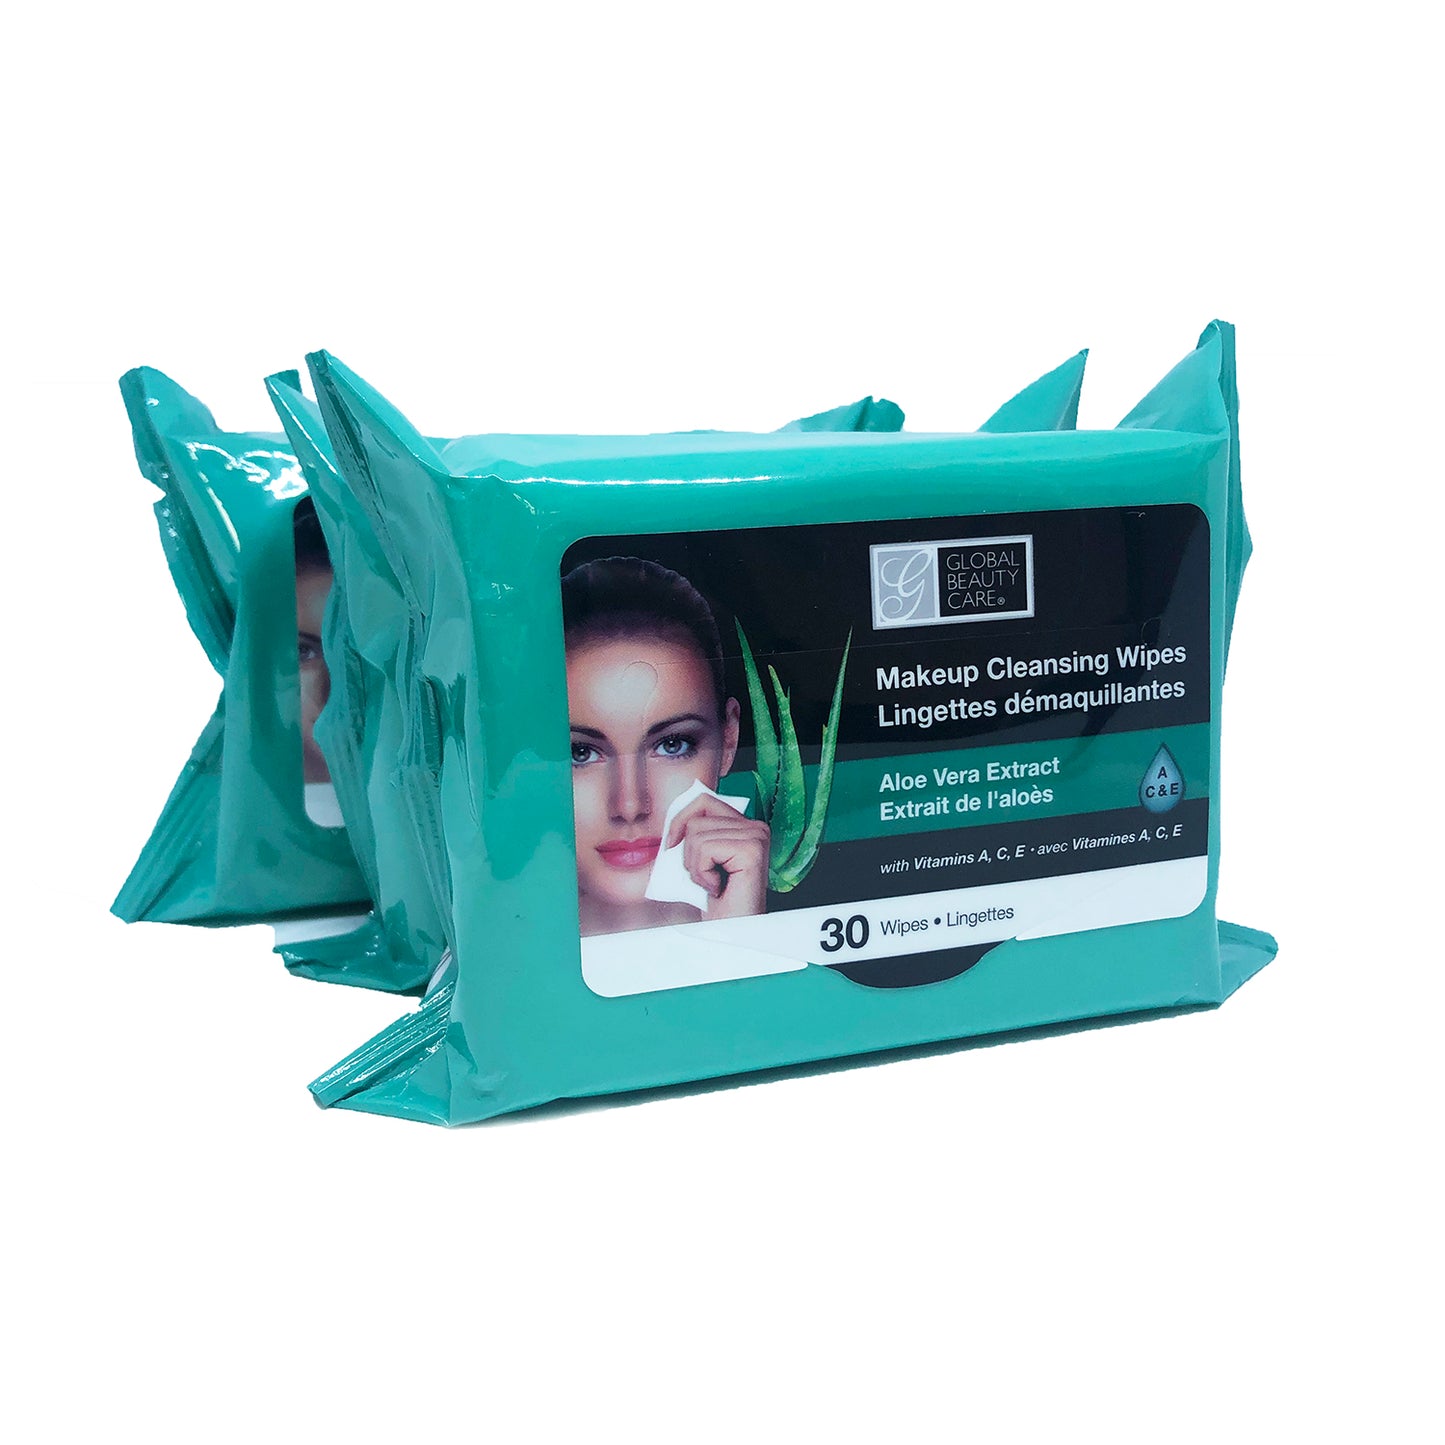 Makeup Cleansing Wipes Aloe Vera Extract 30 wipes "3-PACK" by Global Beauty Care